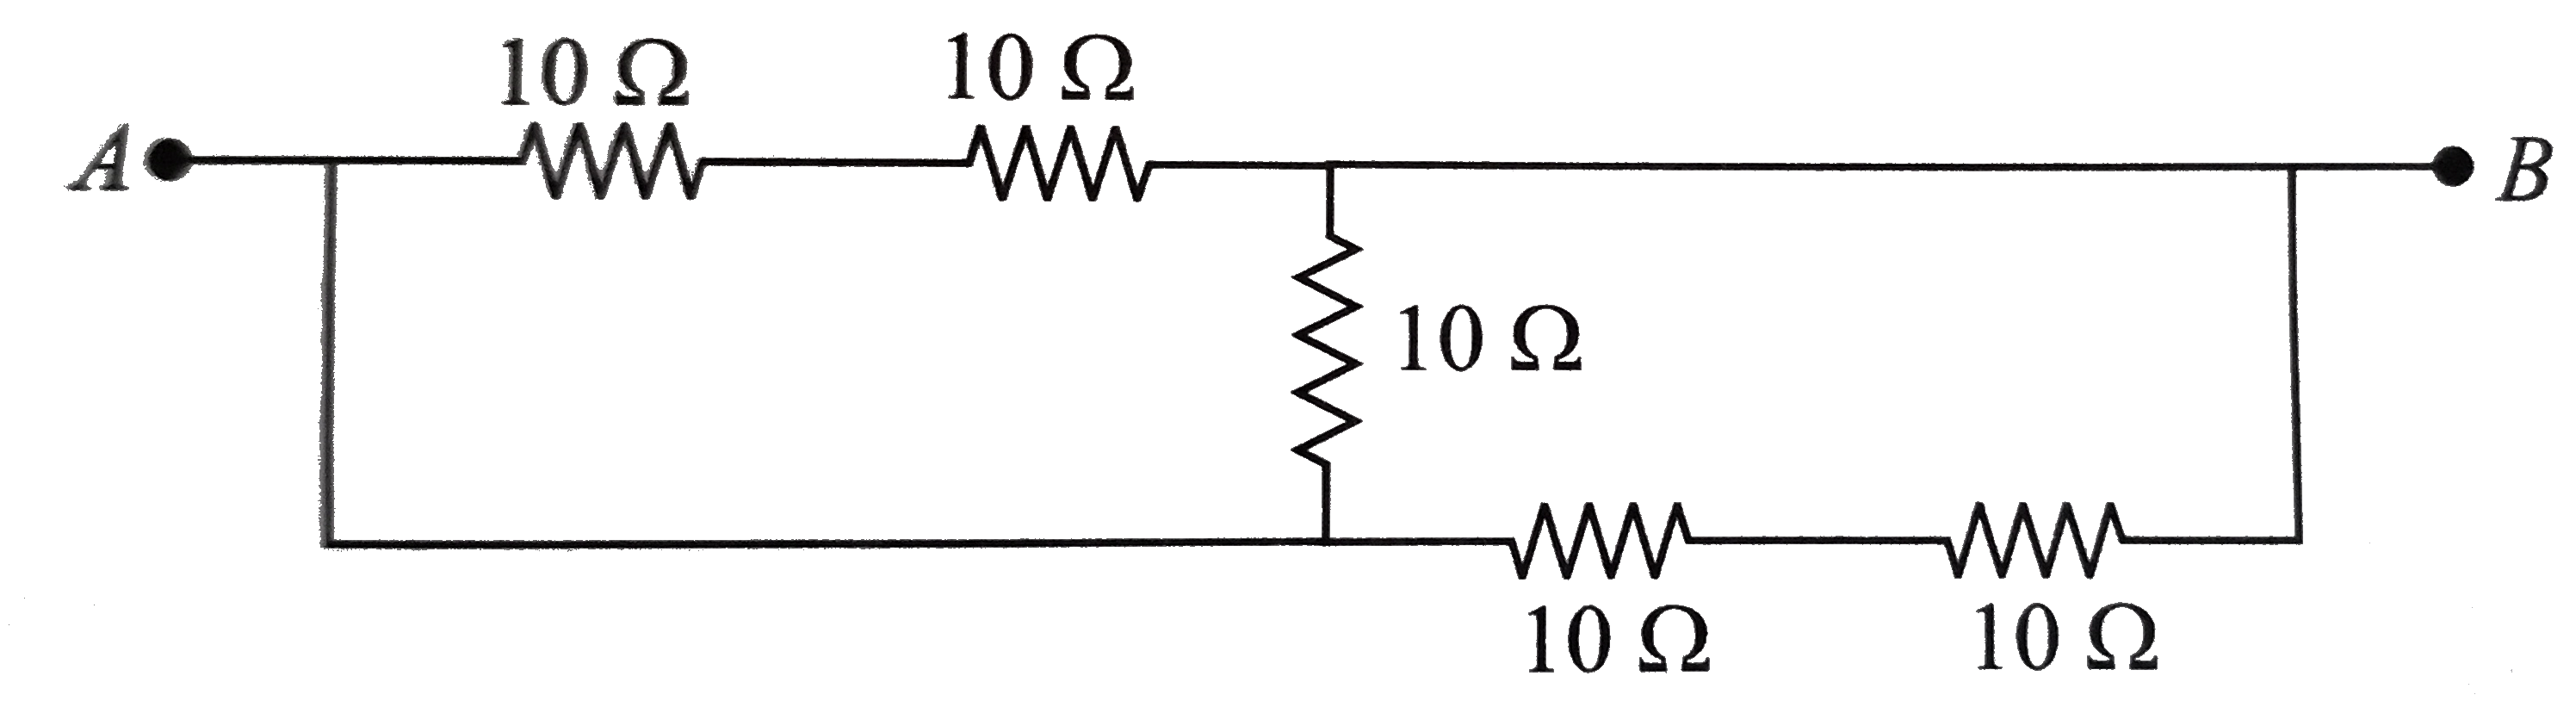 Five equal resistances of 10Omega are connected between A and B as shown in figure. The resultant resistance